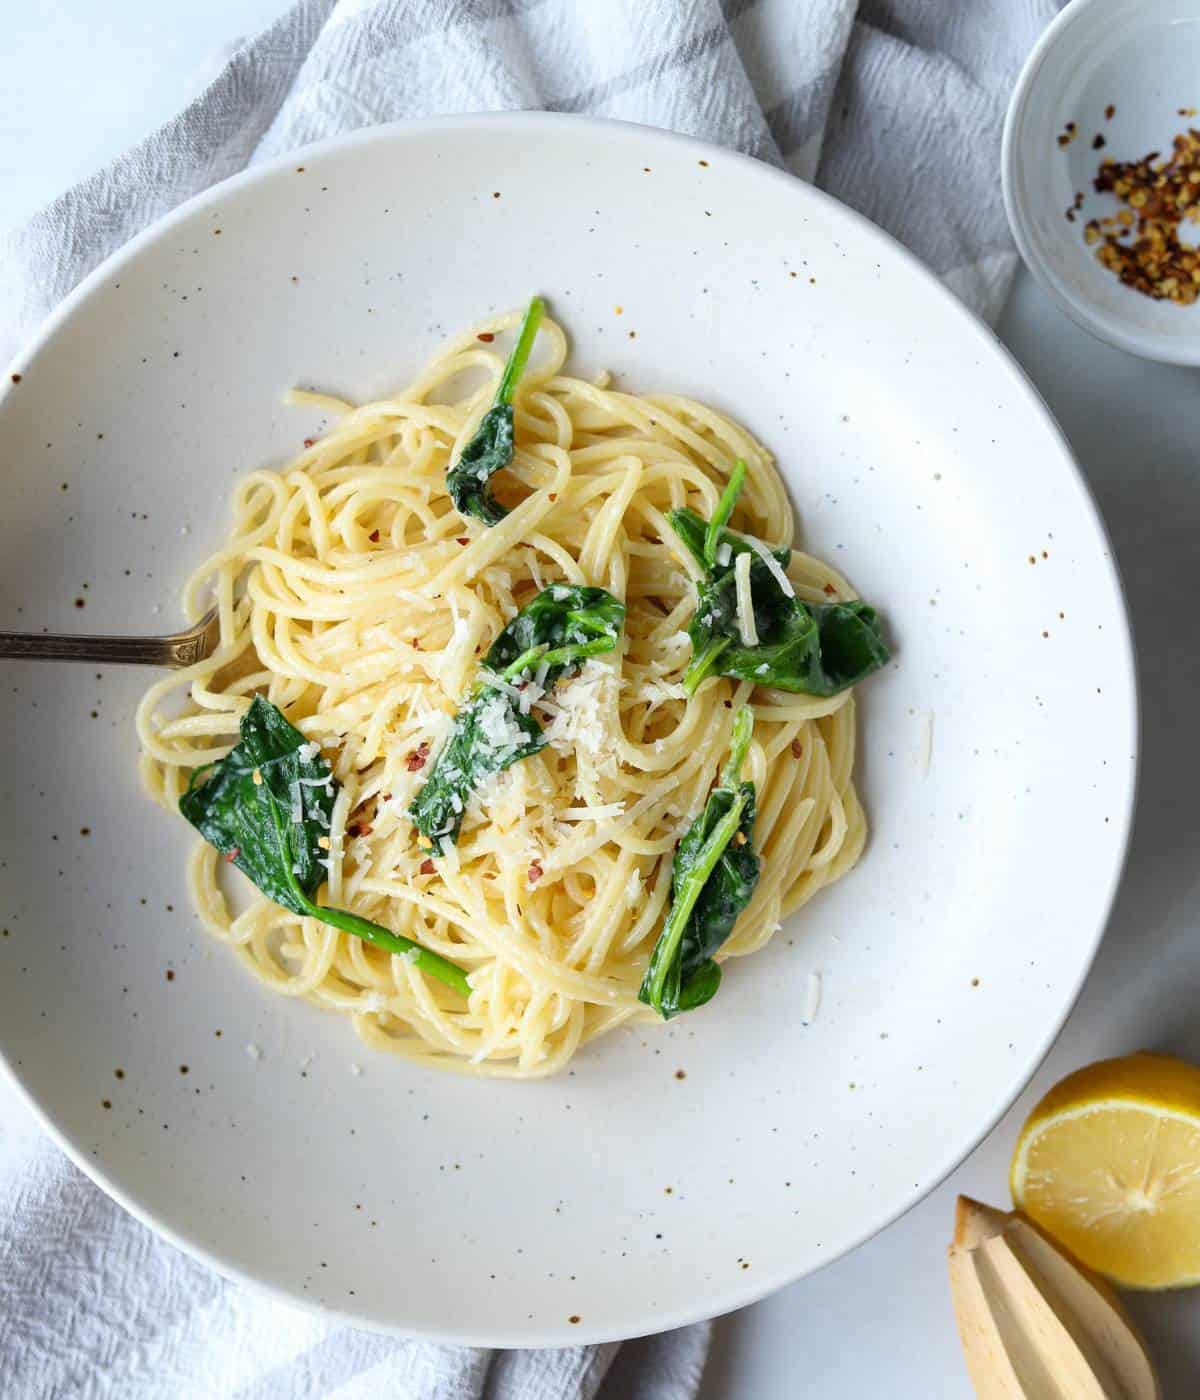 Lemon pasta with spinach in bowl with fork.